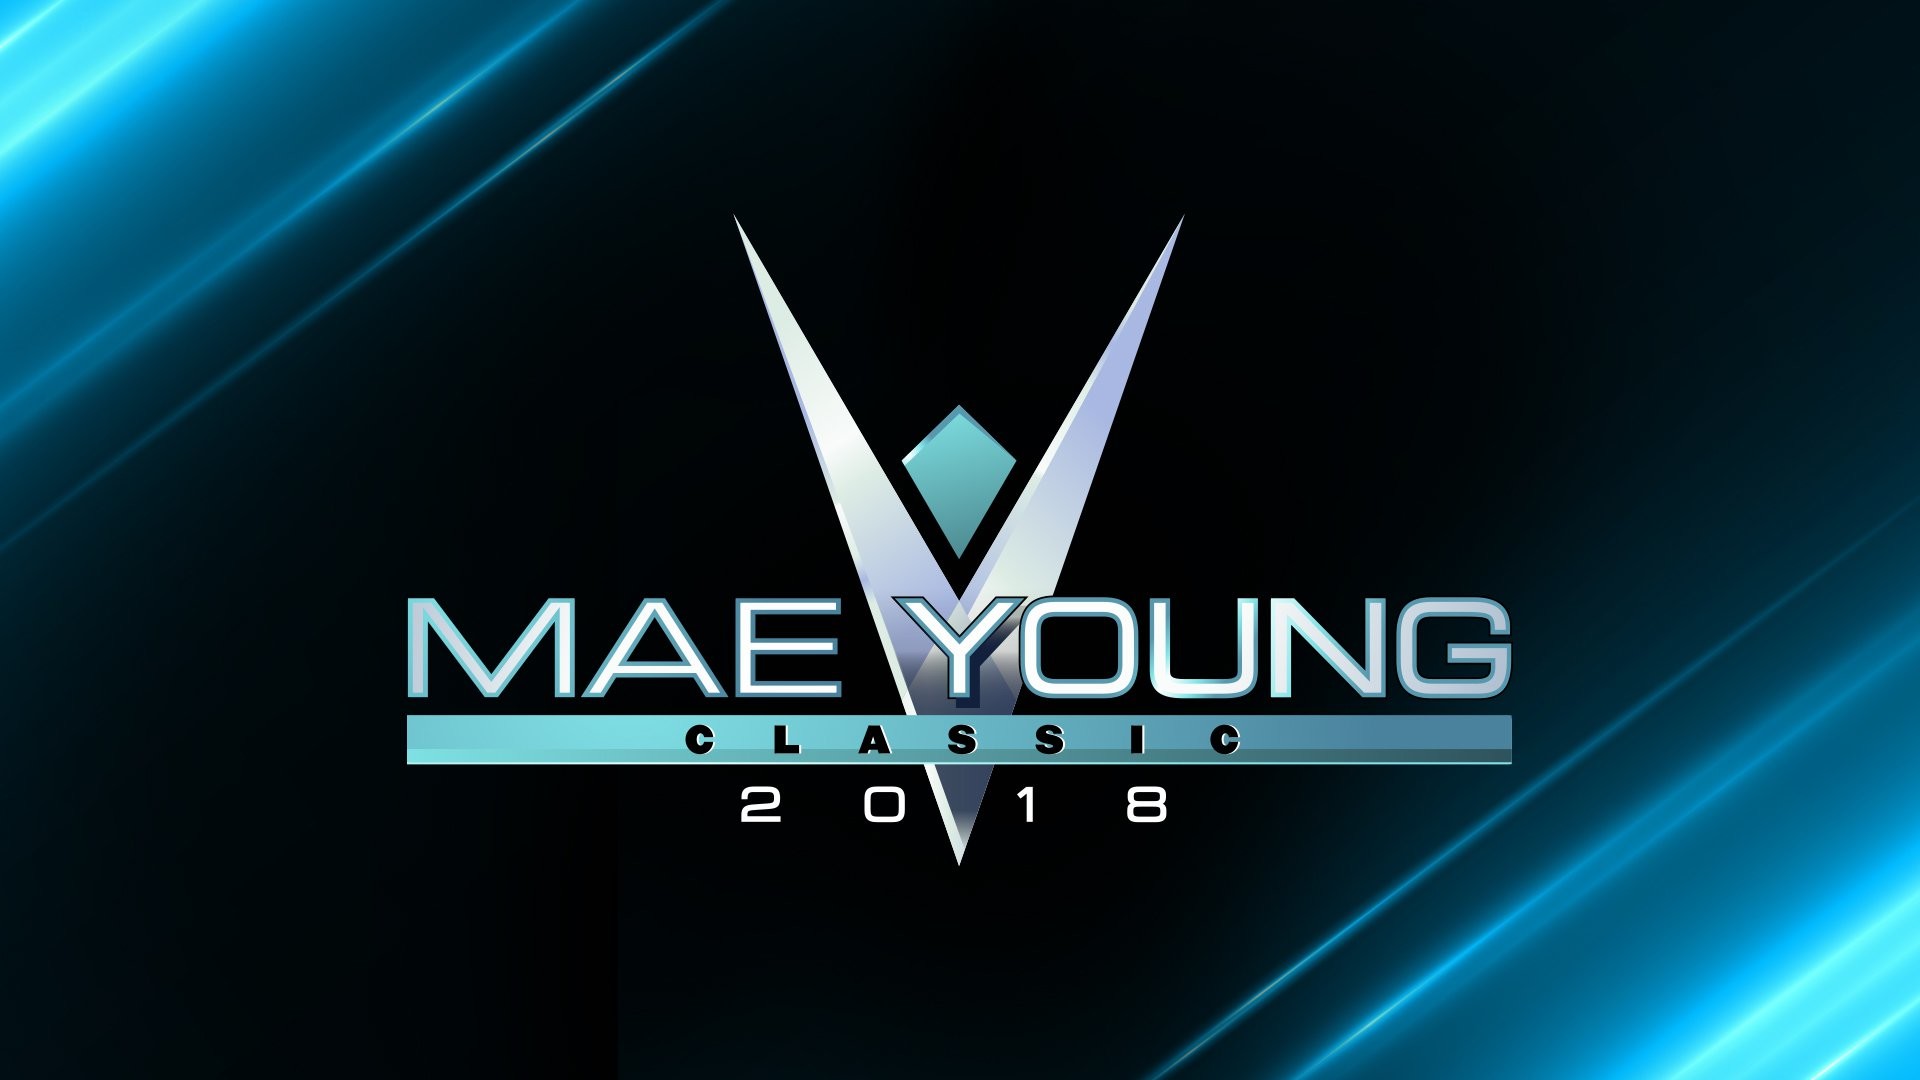 1920x1080 Mae Young Classic 2018 premieres Wednesday, Sept. 5, on WWE Network